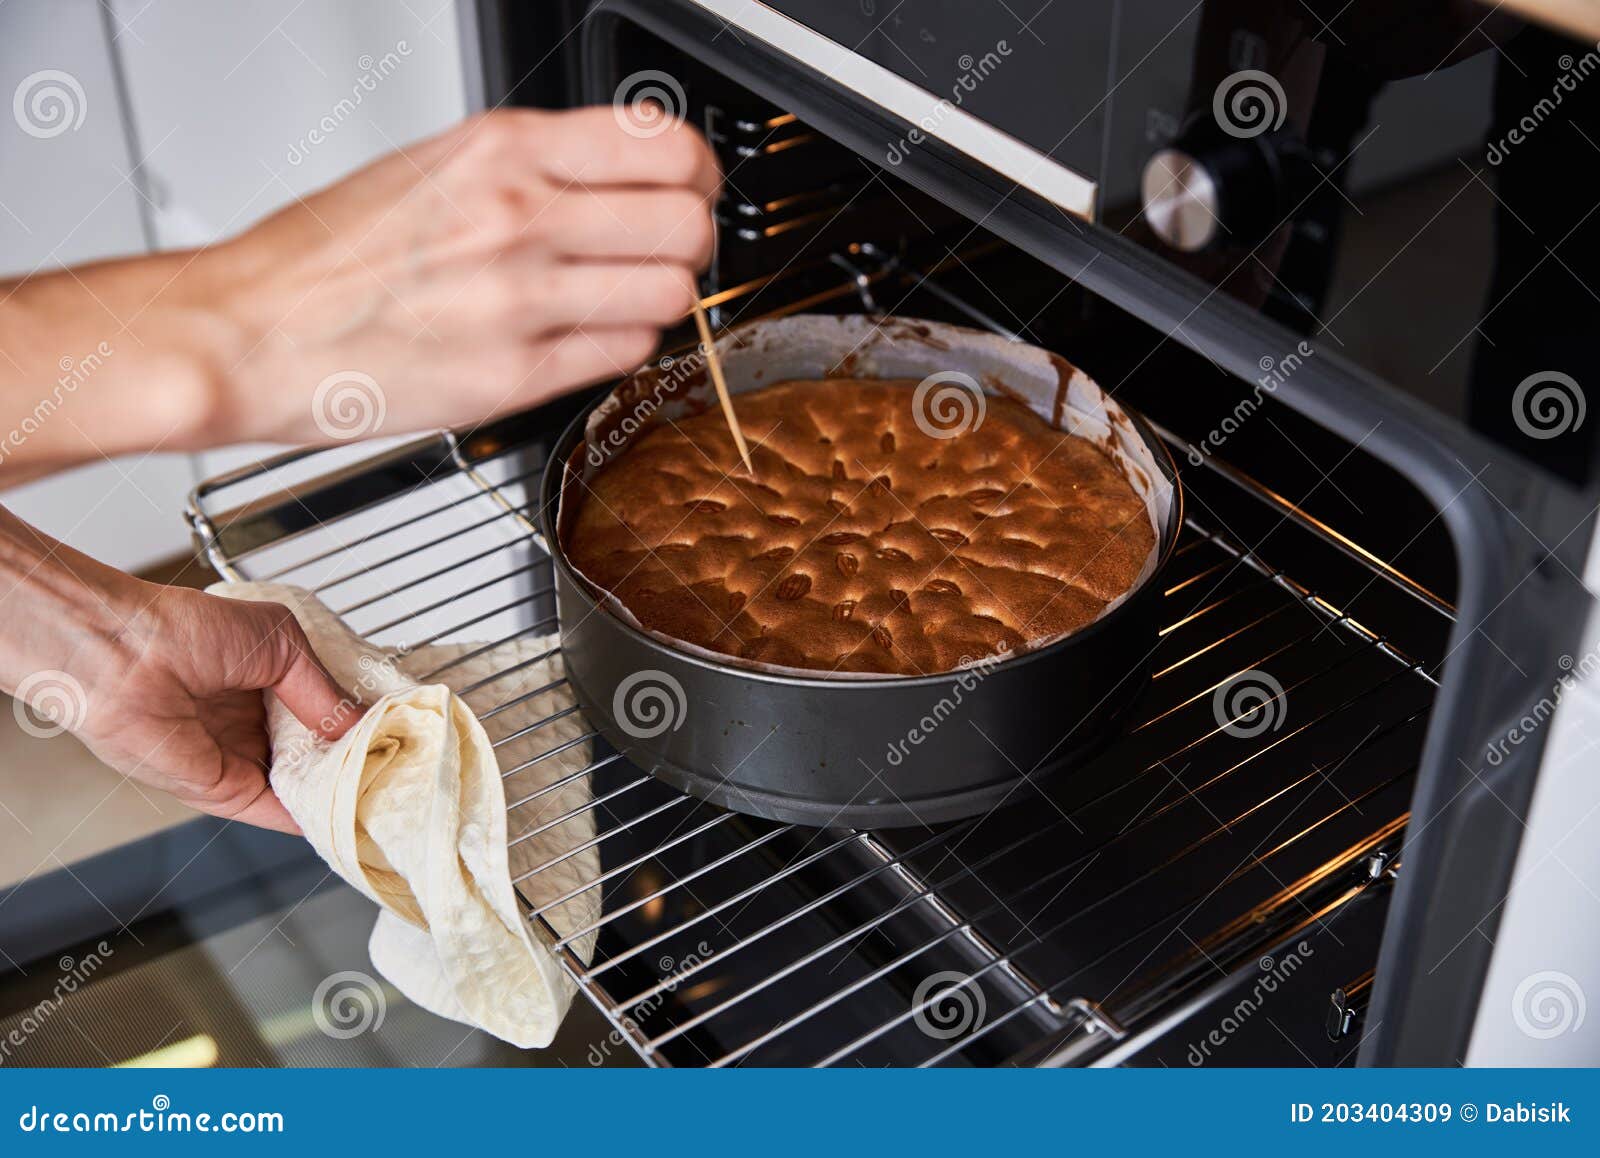 Female hand turning on the oven to make a cake at home. Close-up of the